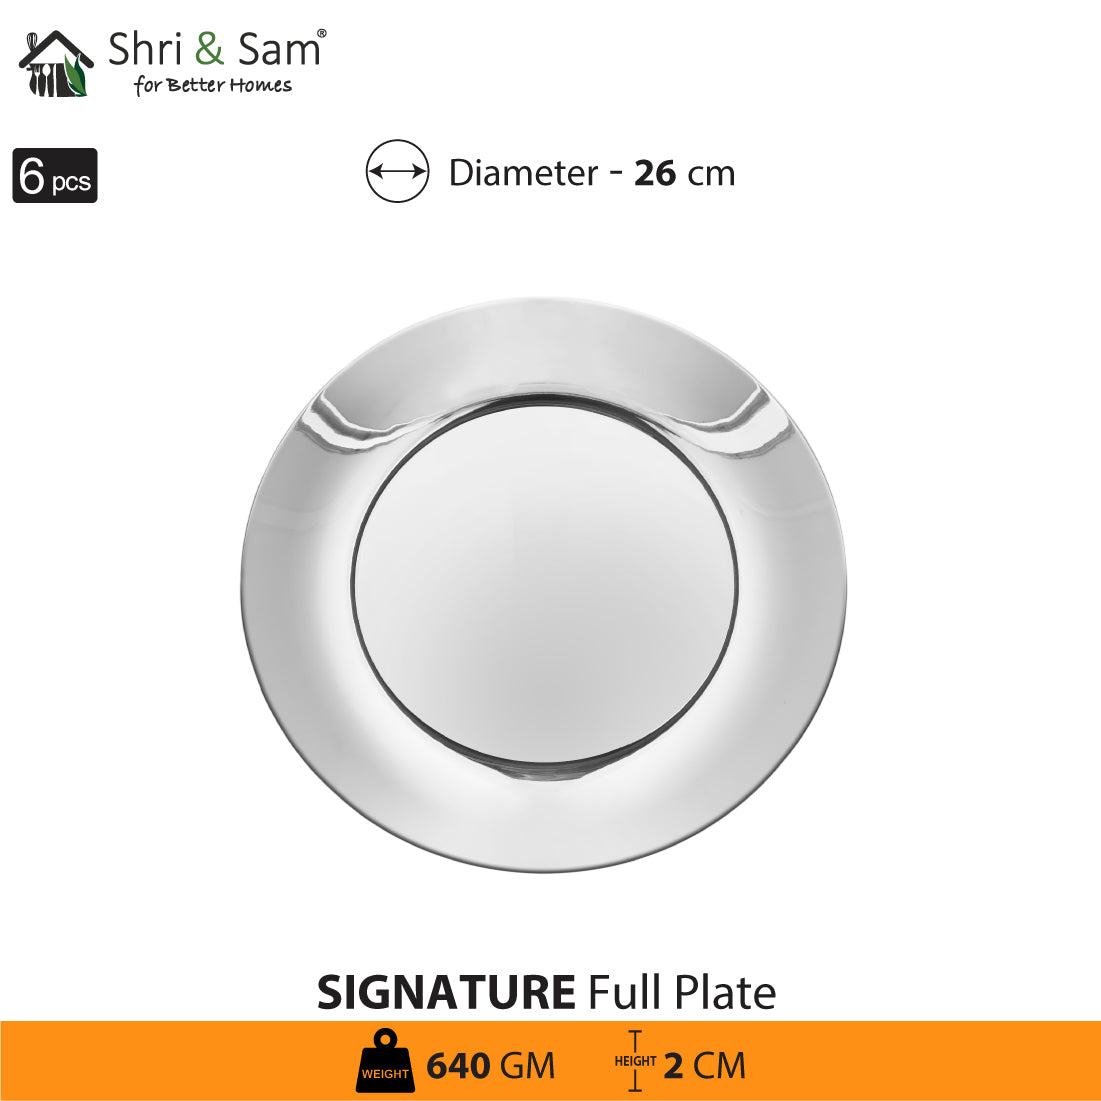 Stainless Steel 6 PCS Full Plate Signature - Shiny